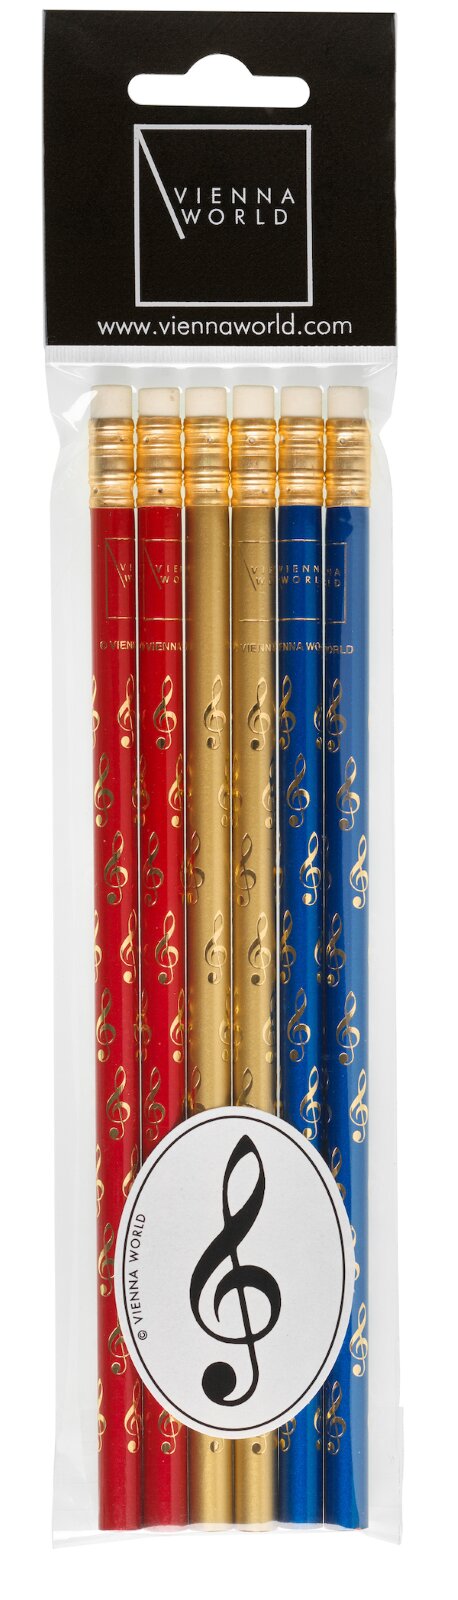 Vienna World Set of 6 treble clef pencilsPencil set G-clef assorted (6 pcs) red / gold / blue (6 pieces per package) Schreibmaterial Z 725 : photo 1